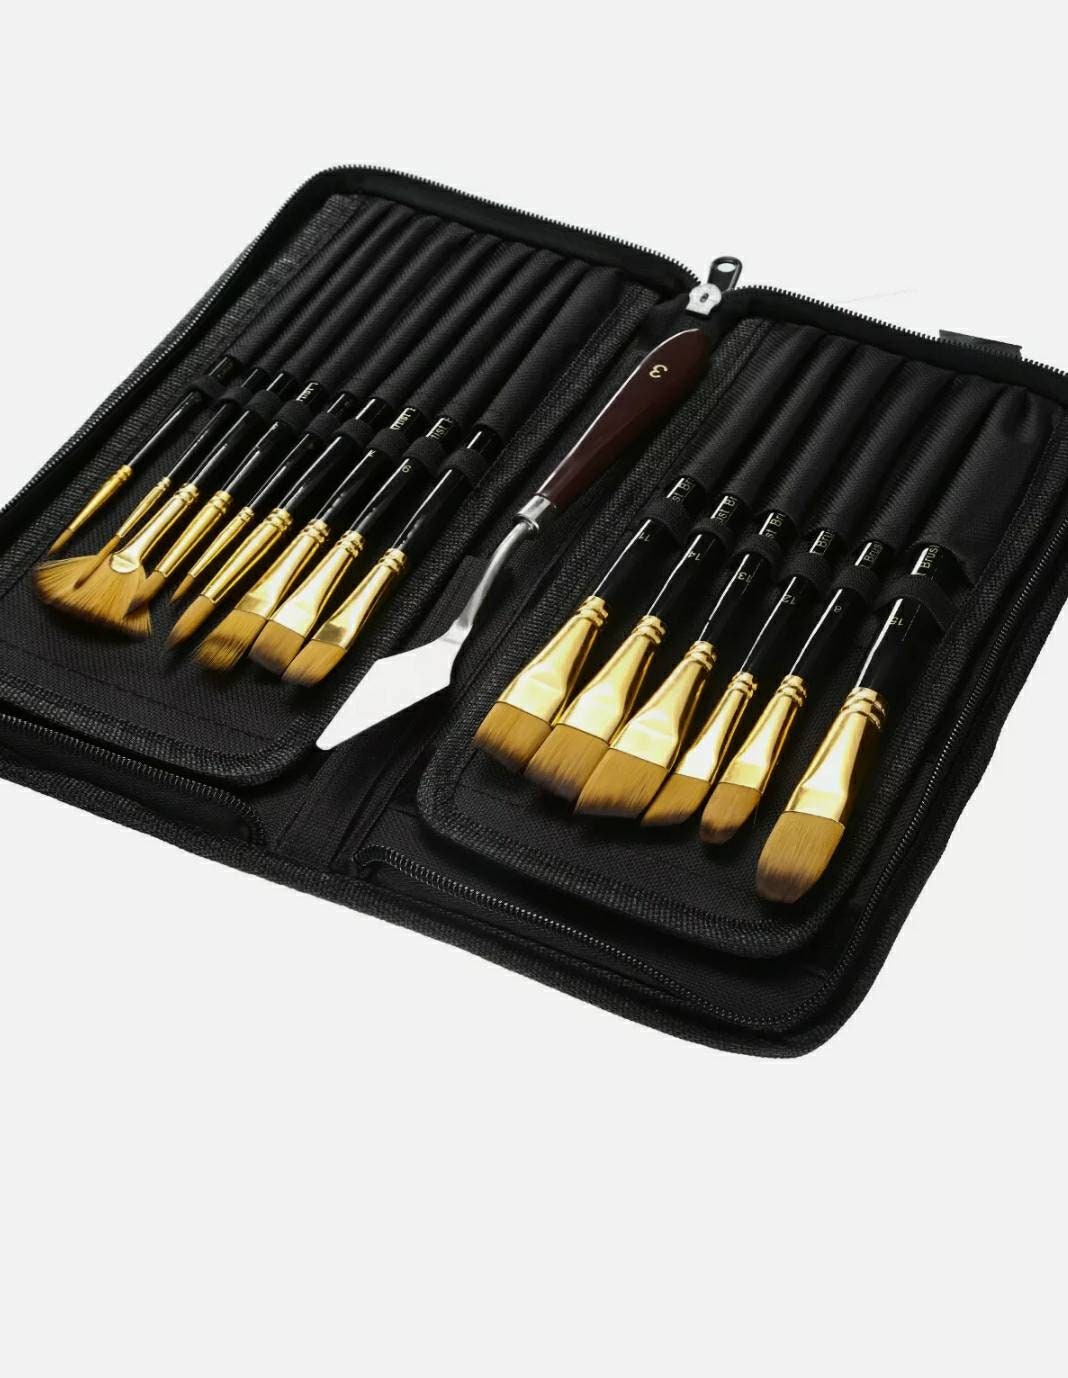 6 Pack of Miniature Detail Paint Brushes 